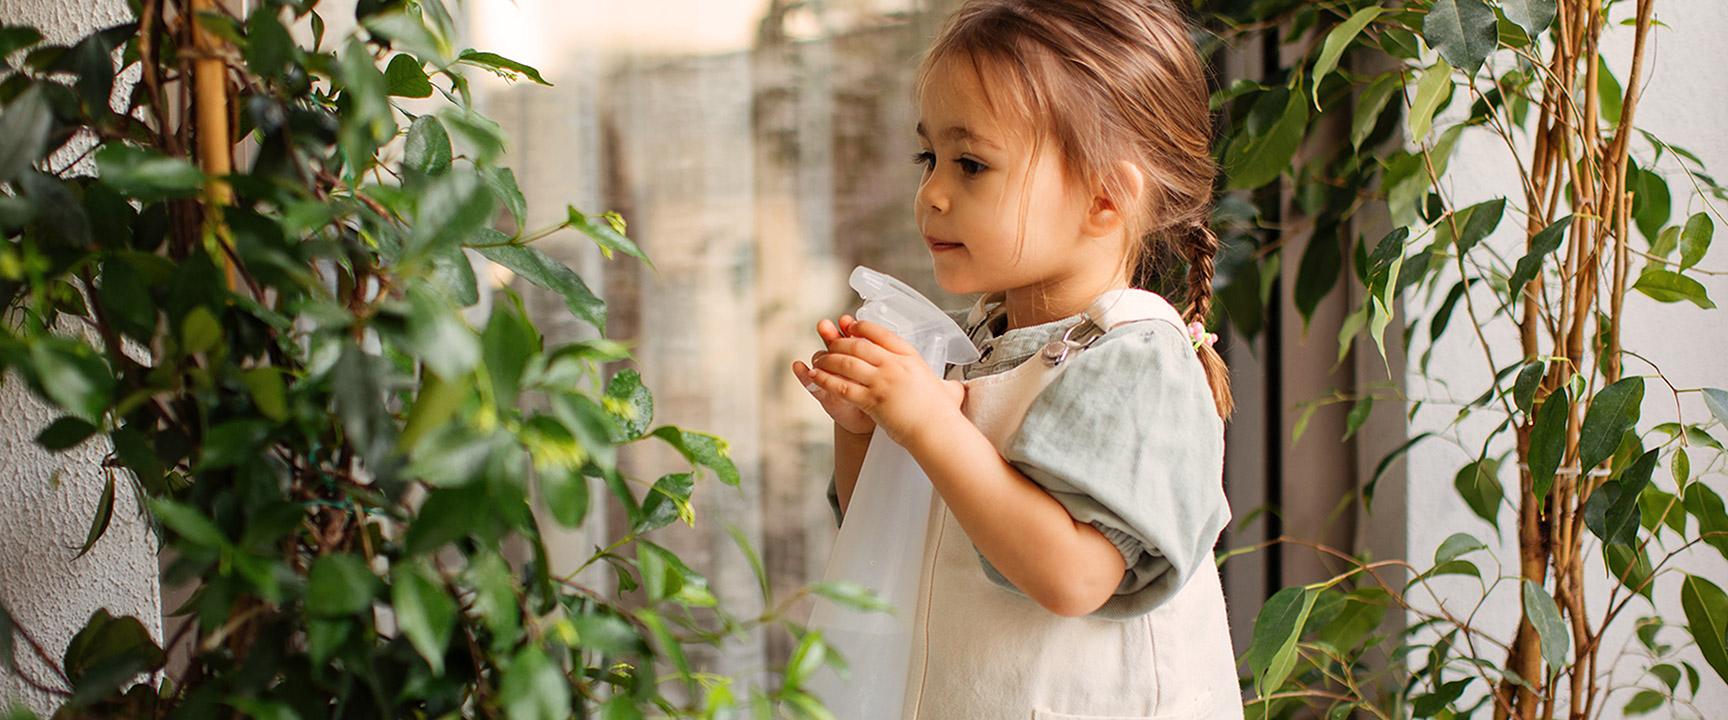 Young girl watering plant with a mister